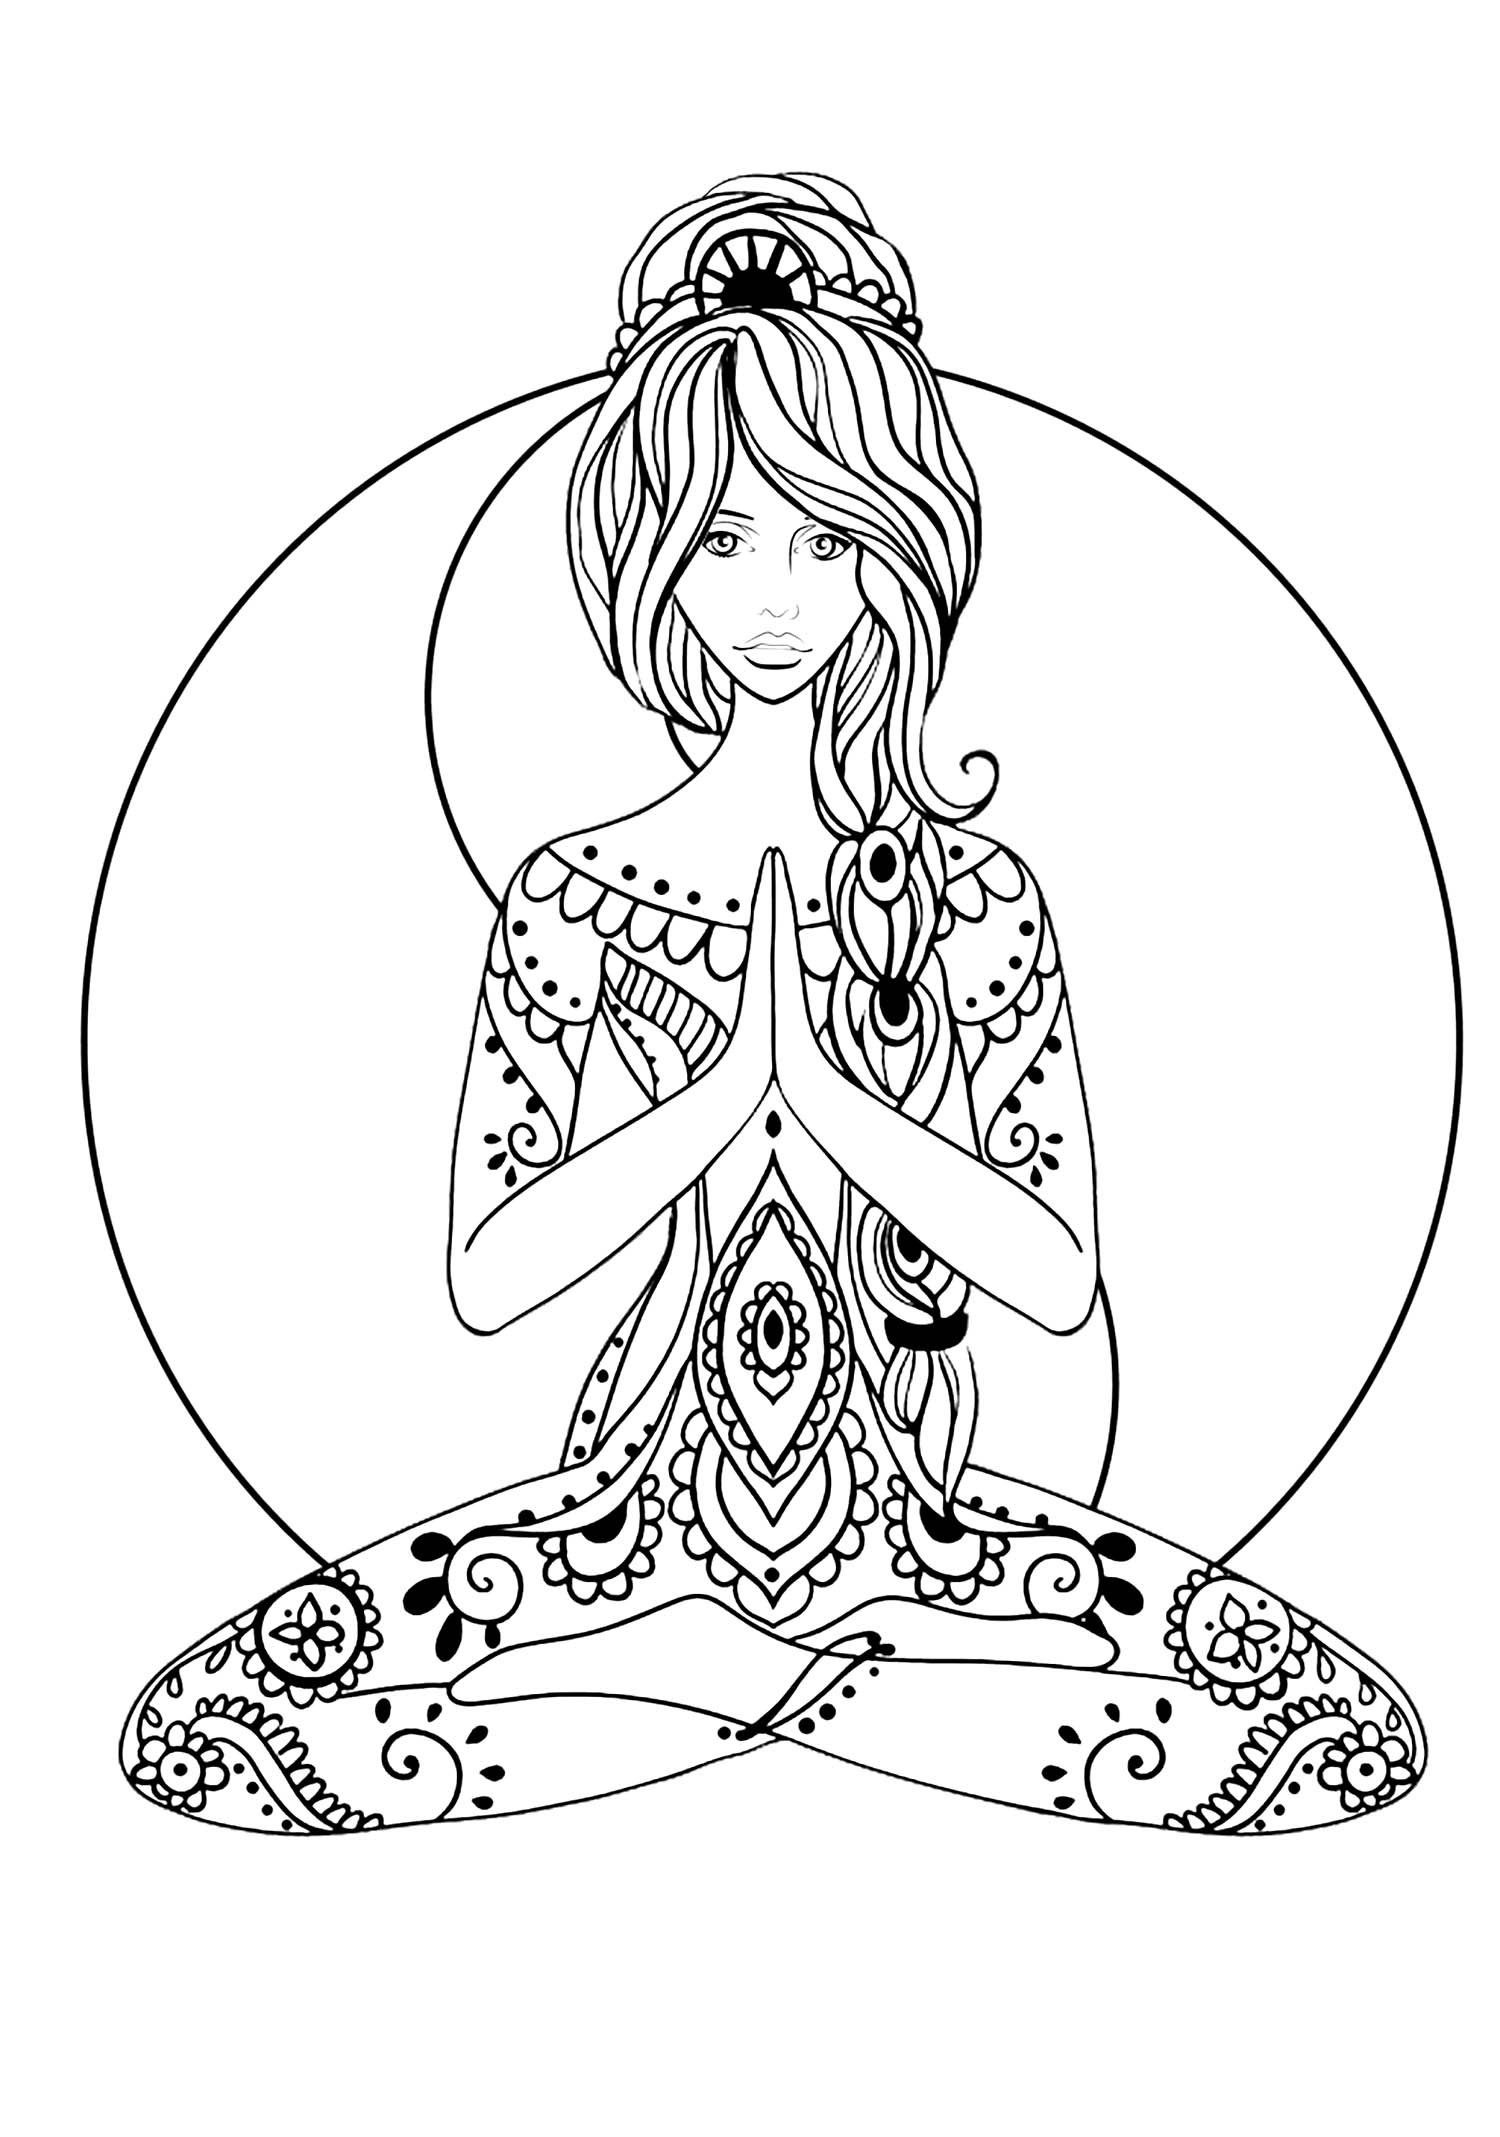 Yoga Coloring page (easy)